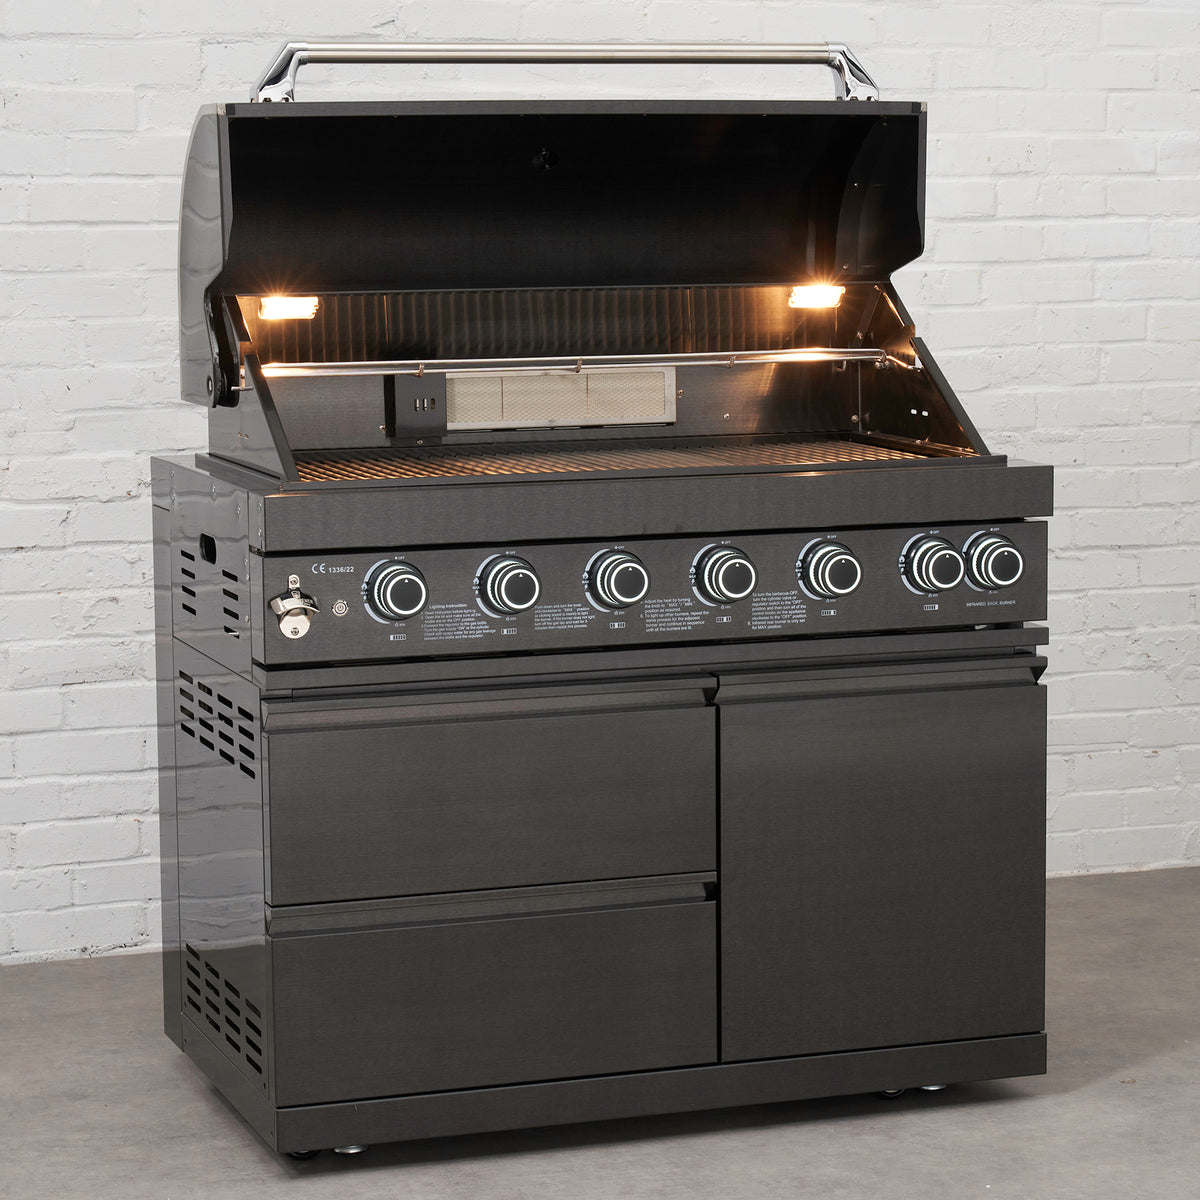 Draco Grills 6 Burner BBQ Black Stainless Steel Modular Outdoor Kitchen with Fridge and Sink Unit and Double Cabinet